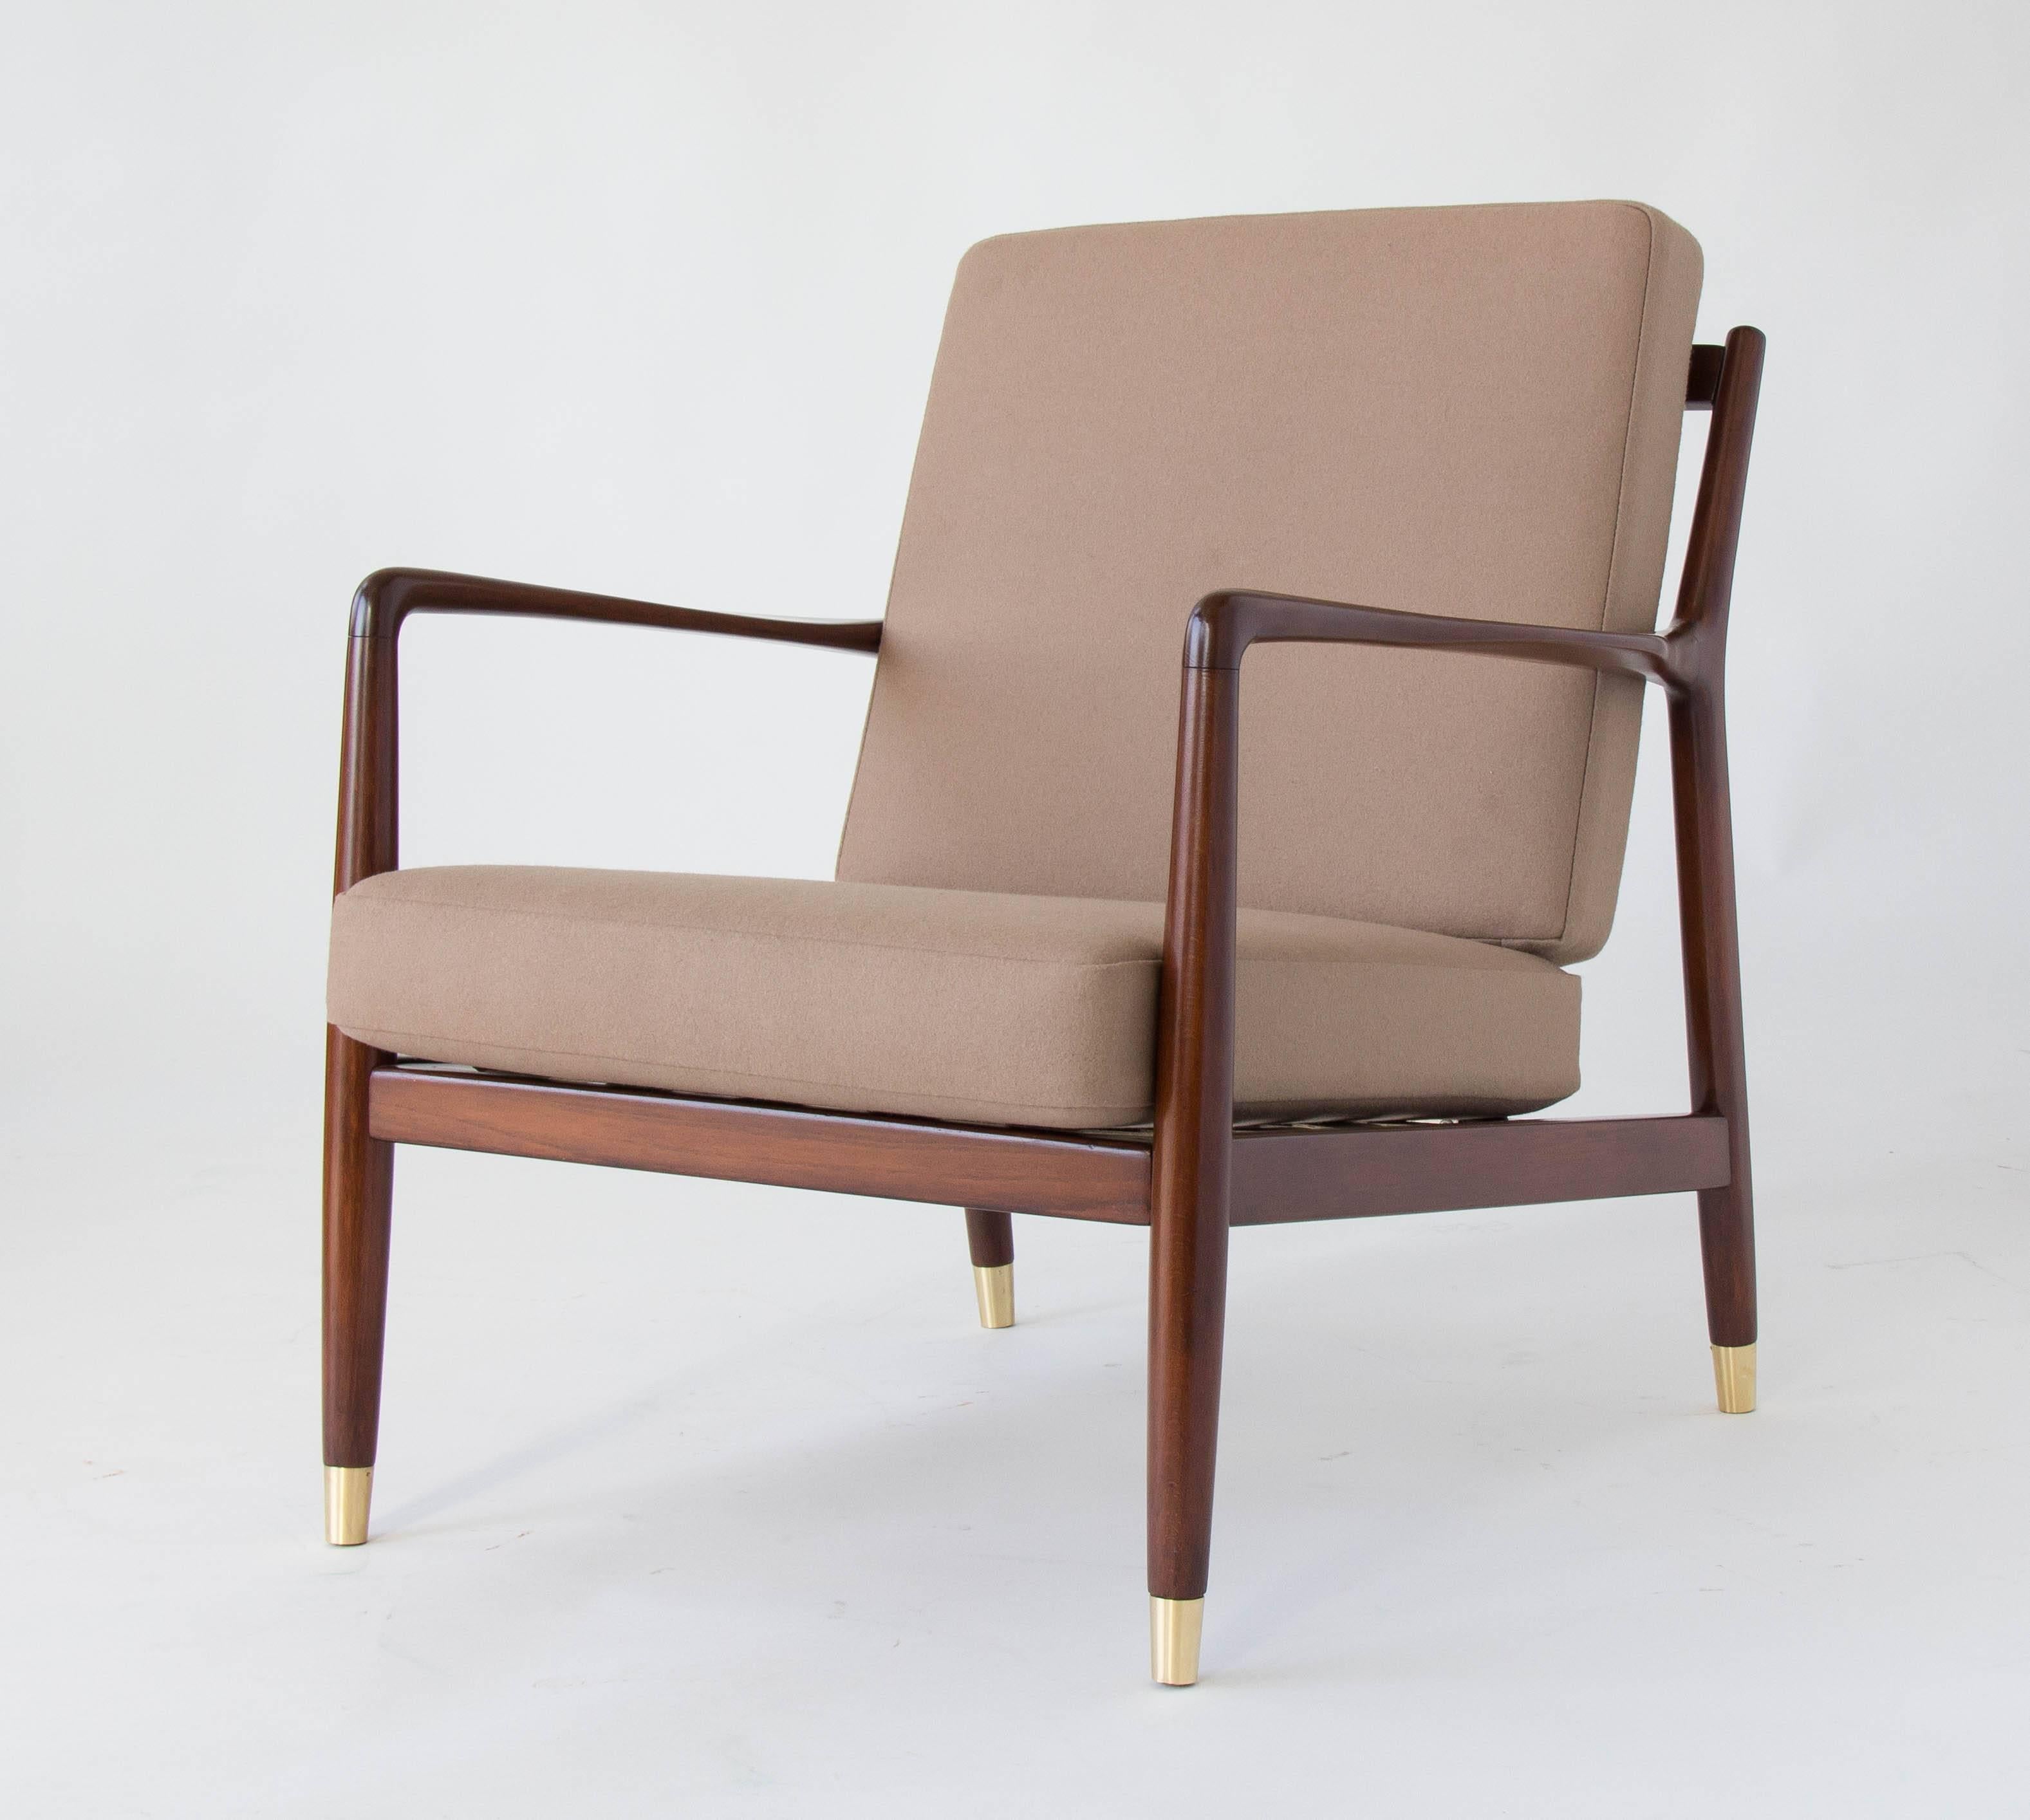 Polished Pair of Lounge Chairs with Brass-Capped Legs by Folke Ohlsson for DUX